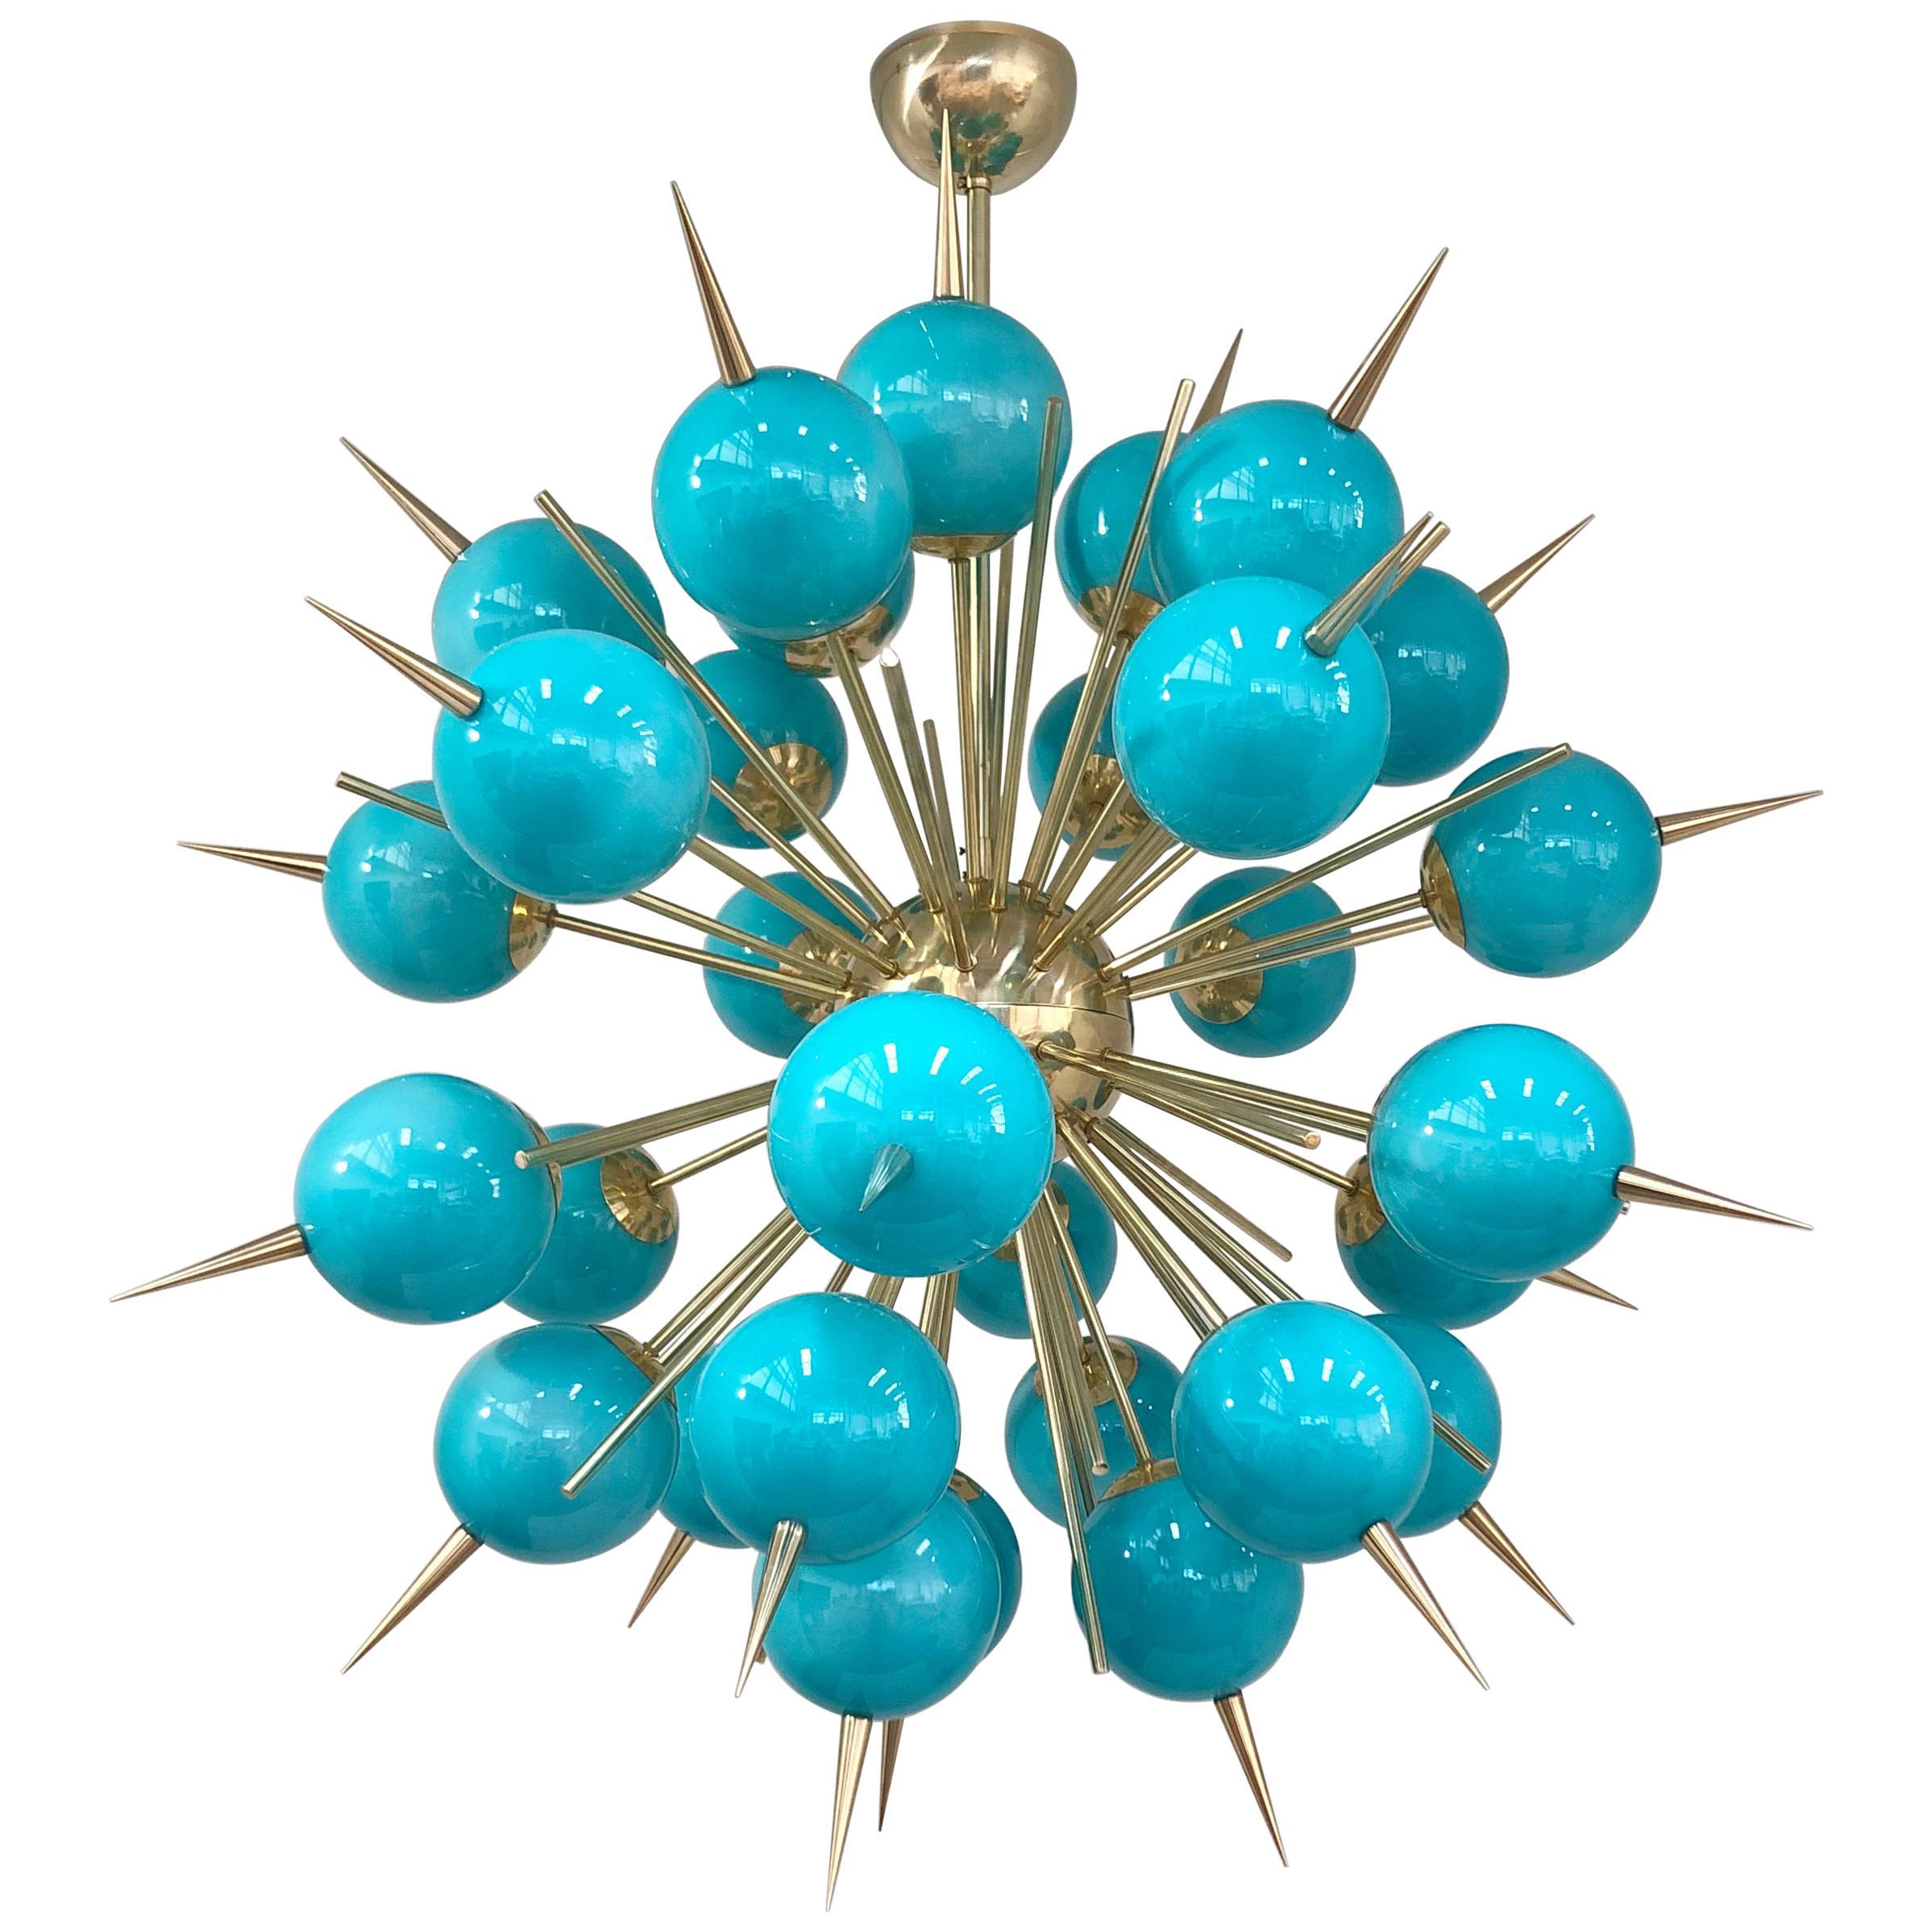 Italian sputnik chandelier with 30 Tiffany blue Murano glass globes and solid brass spikes mounted on brass frame / Designed by Fabio Bergomi for Fabio Ltd / Made in Italy
30 lights / E12 or E14 type / max 40W each
Measures: Diameter 47 inches /